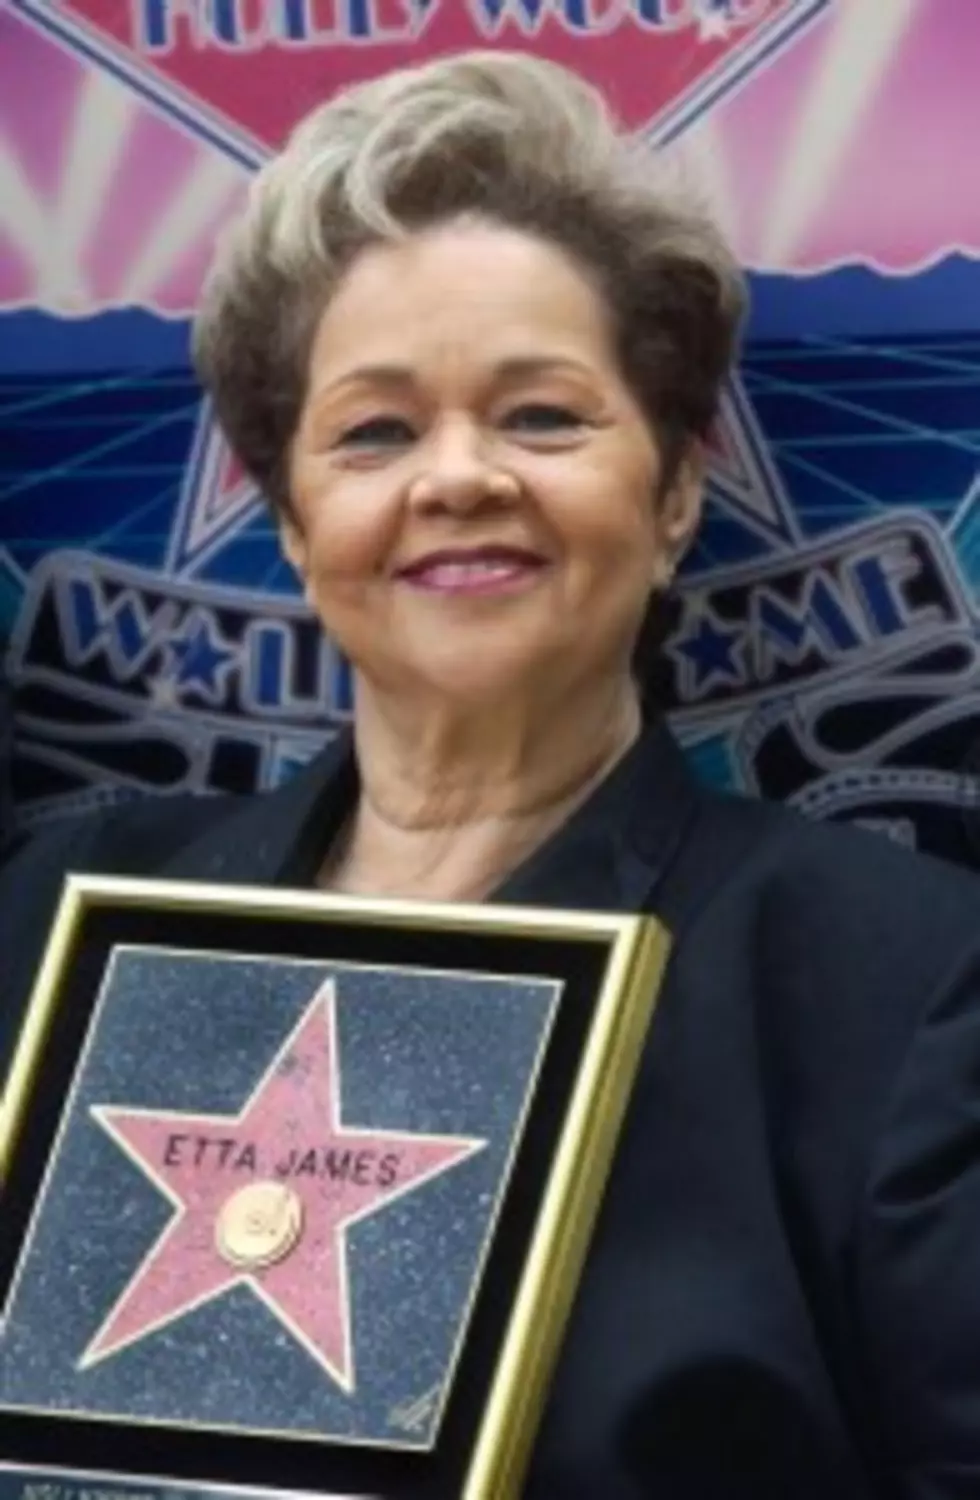 We Have Lost the Beloved Etta James at 73 [VIDEO]